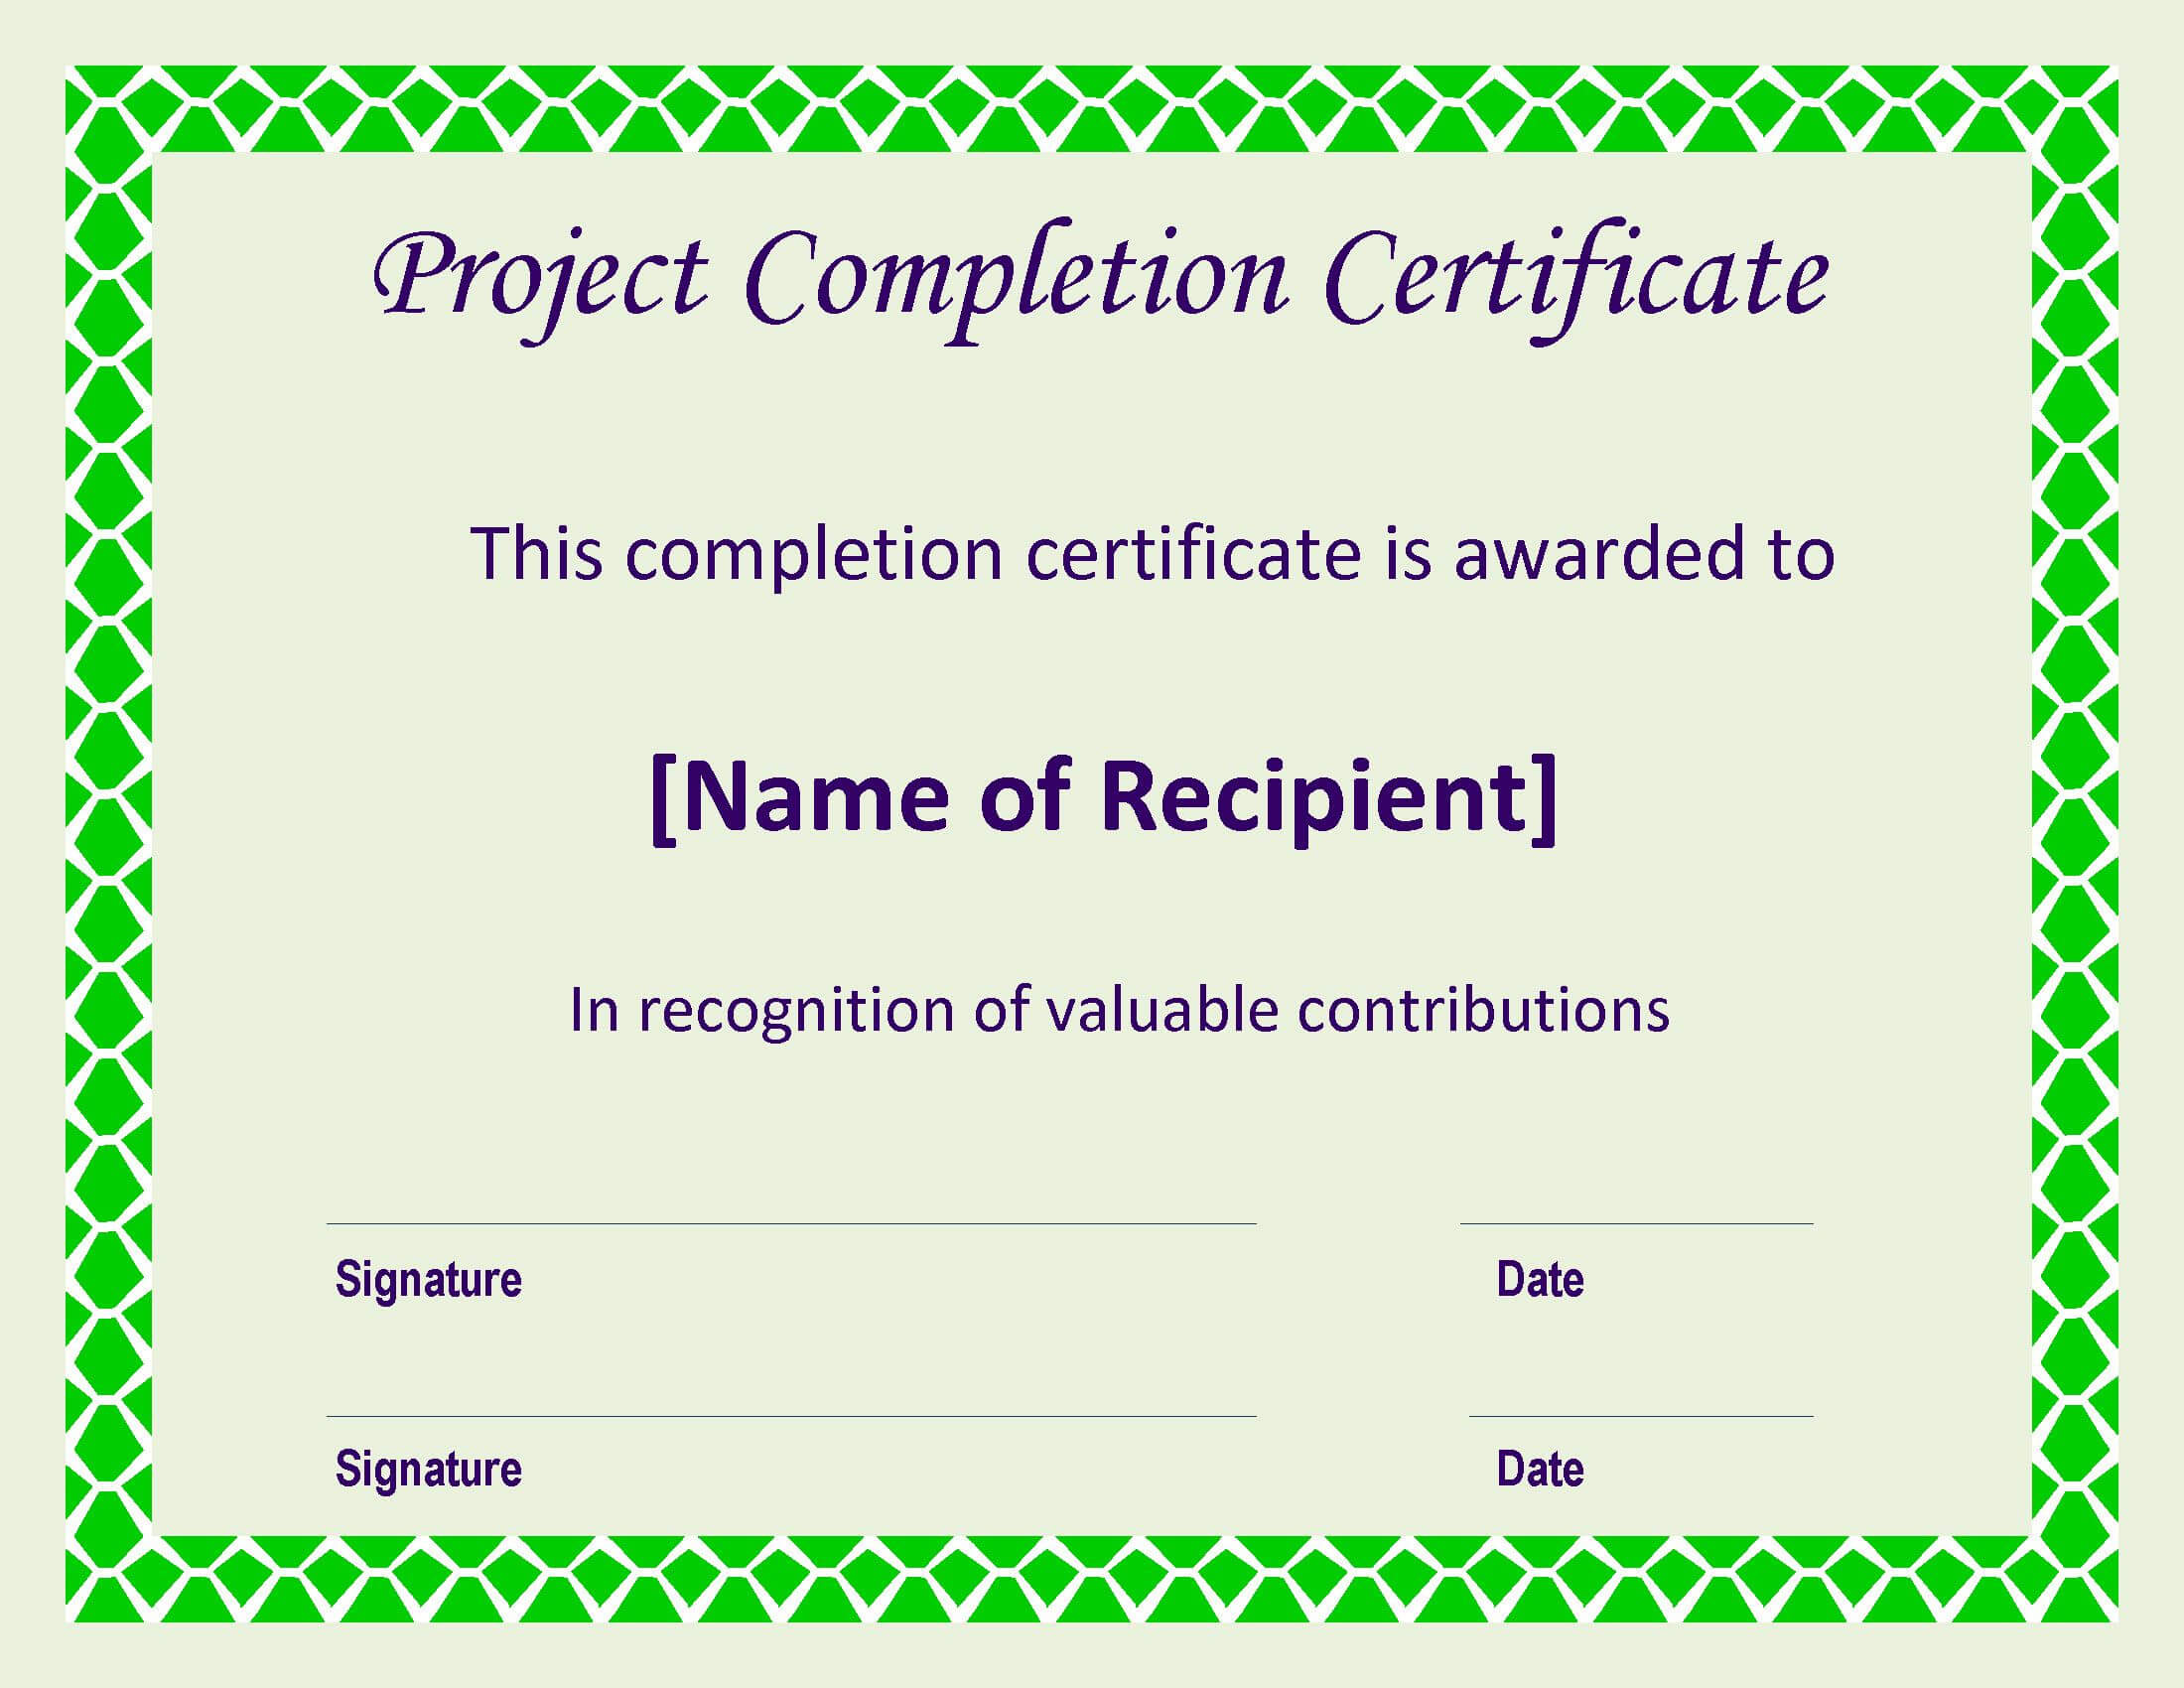 Certificate Of Completion Project | Templates At With Certificate Template For Project Completion